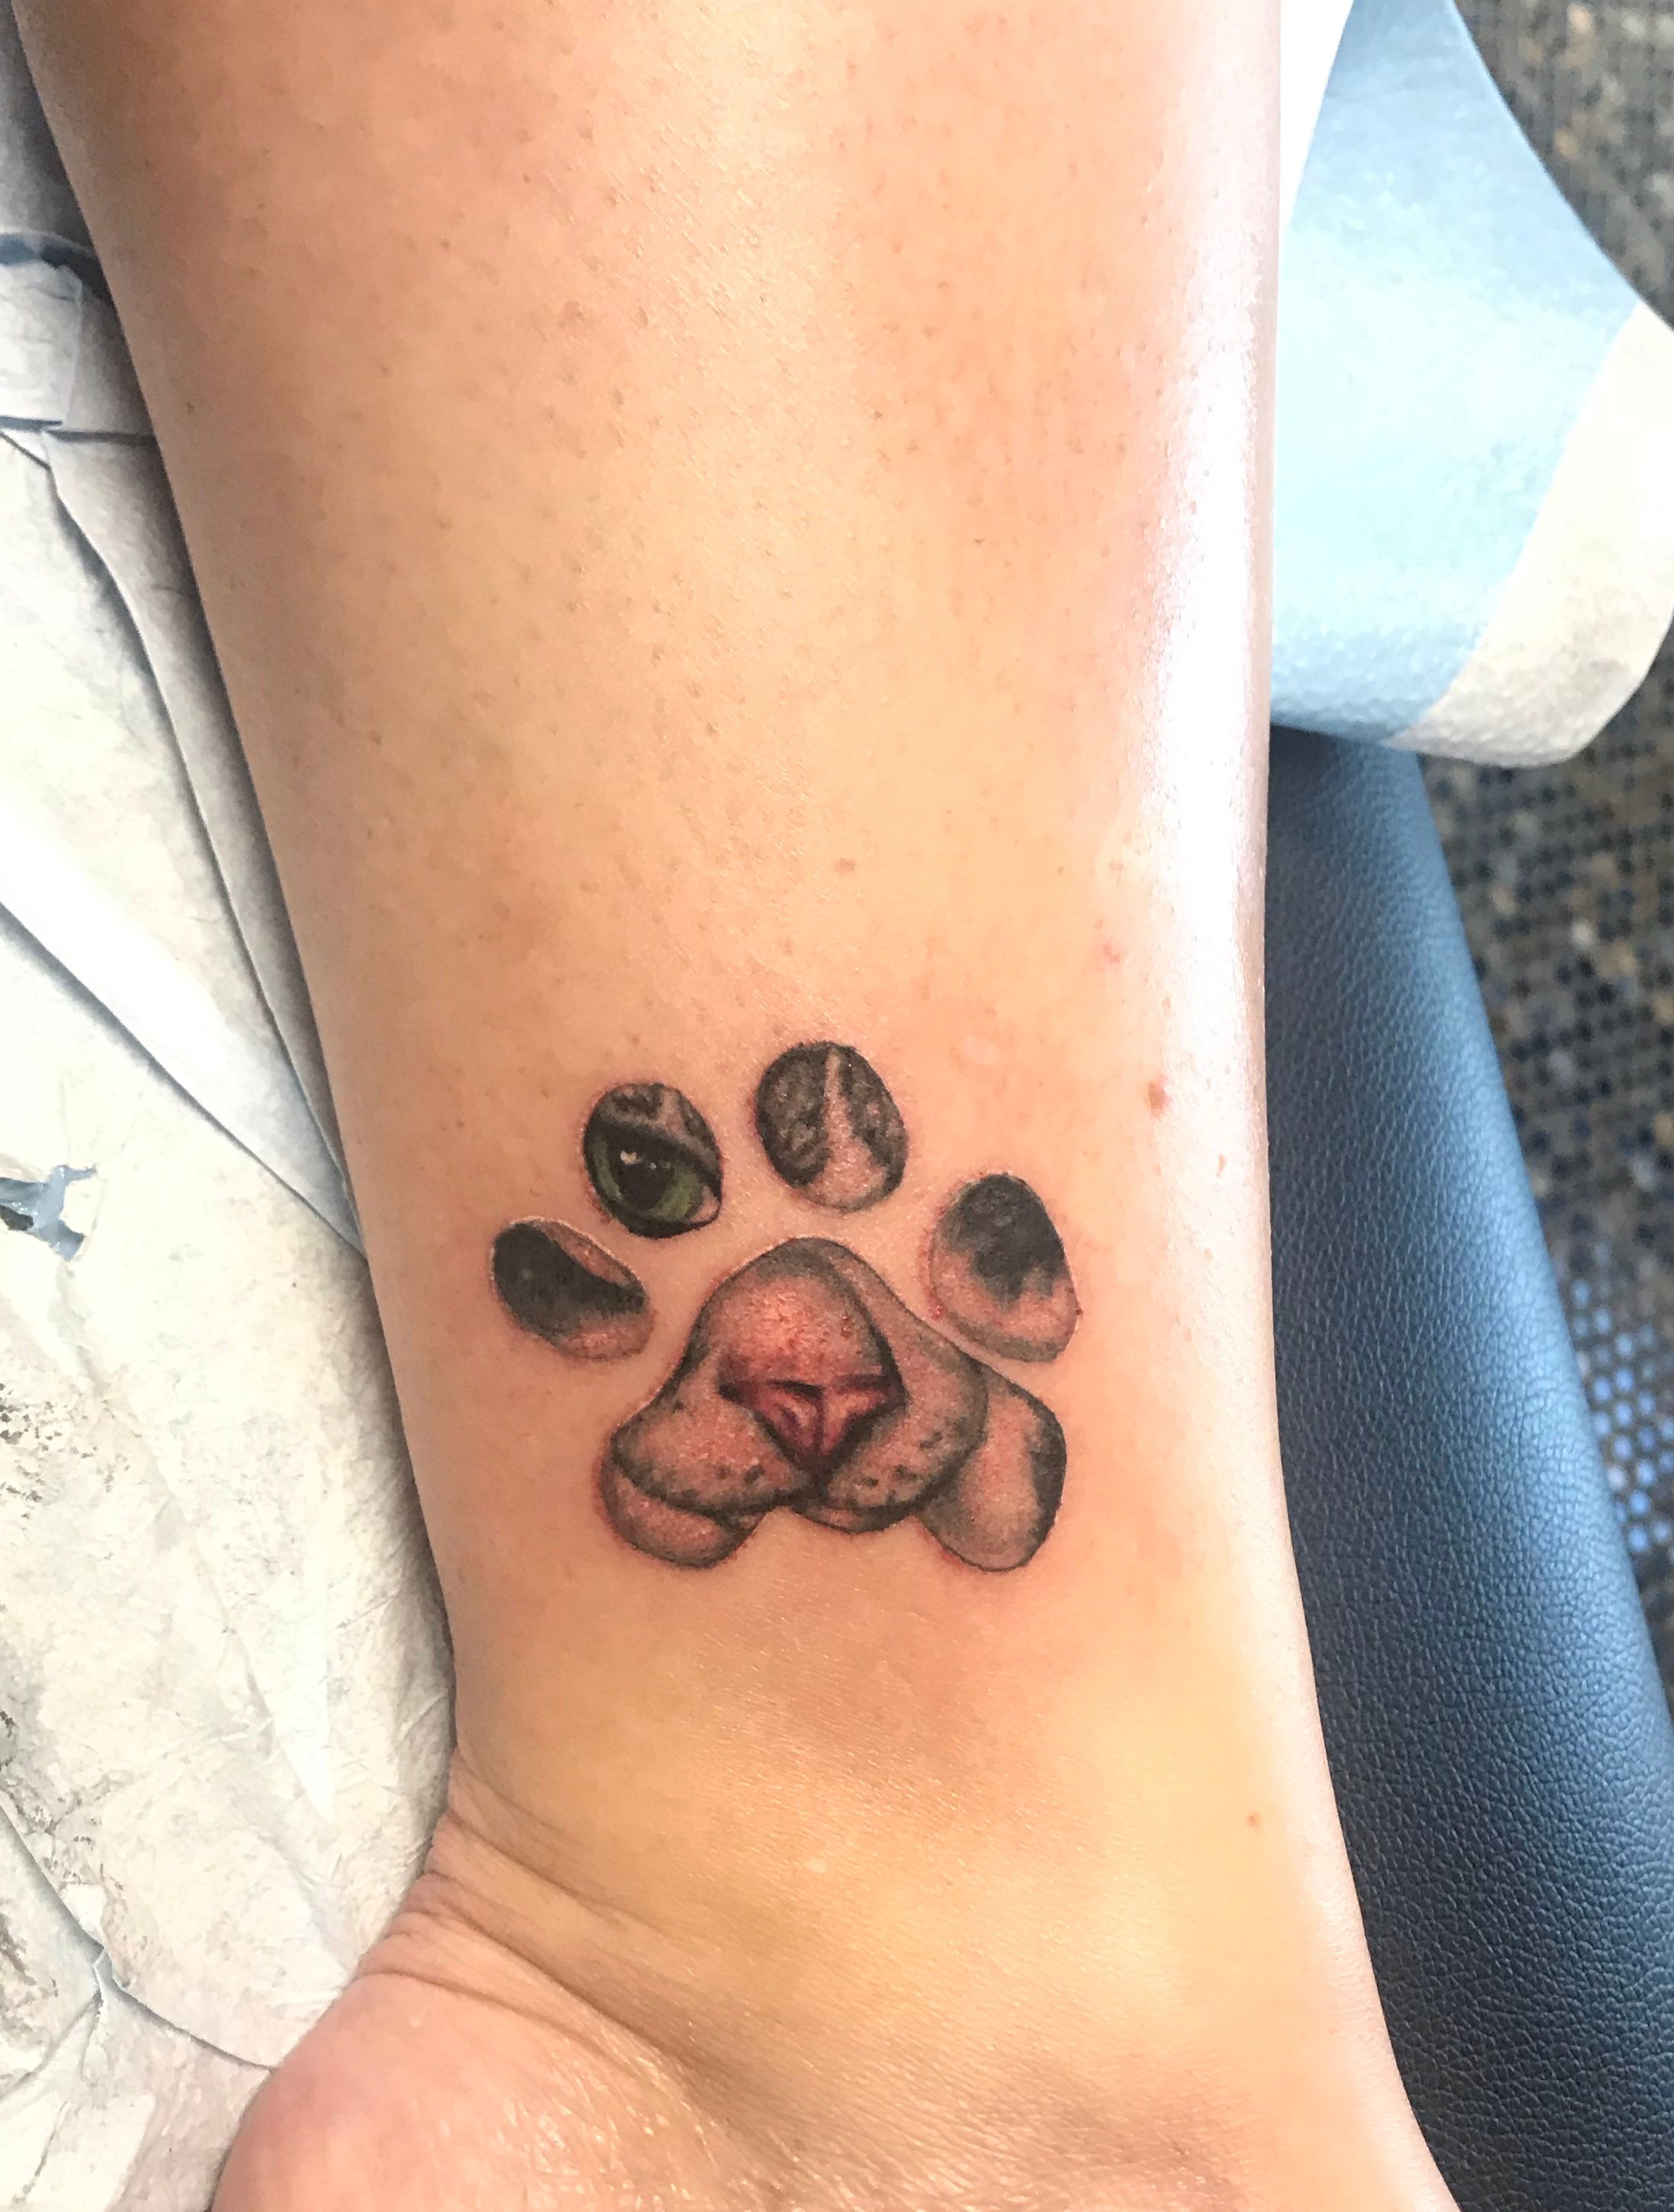 I got my first tattoo. It's a memorial tattoo. My mom's ashes were mixed in  the ink. We both are crazy cat ladies. I miss her dearly. : r/cats